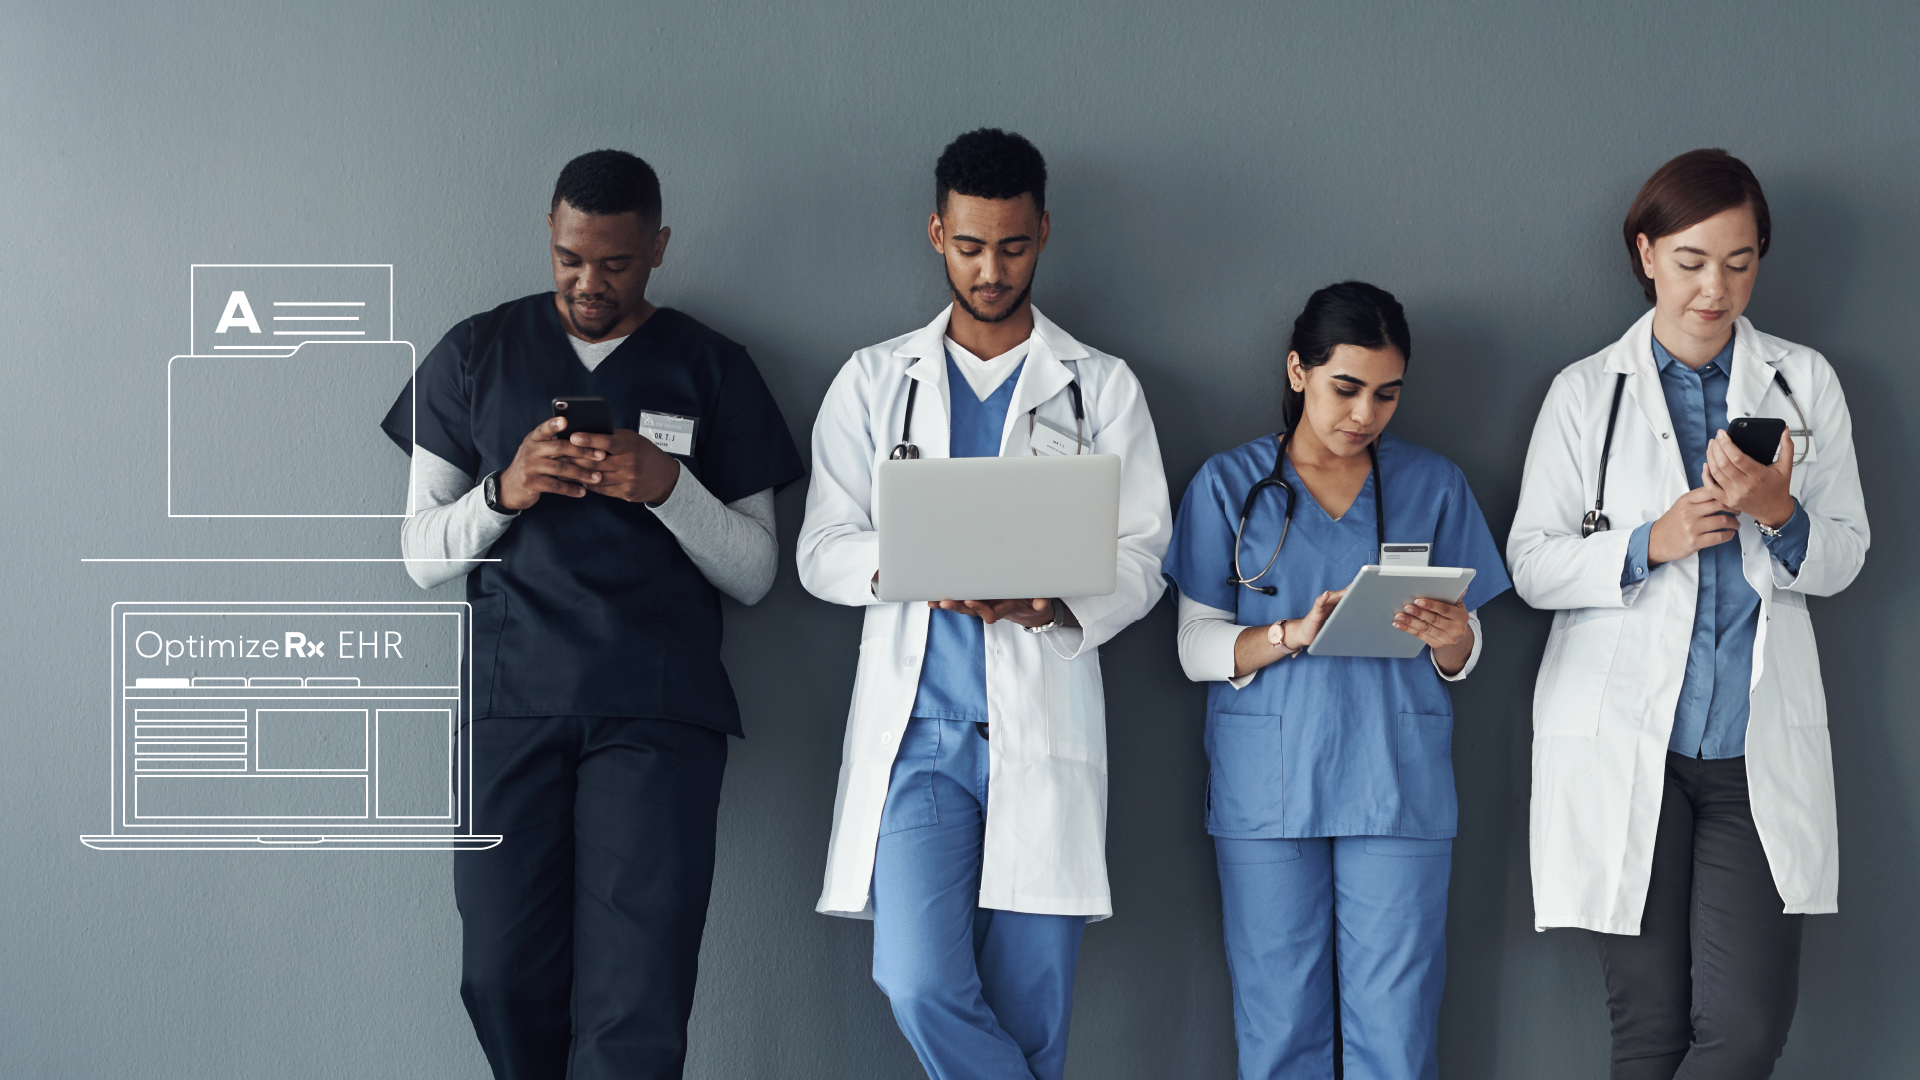 Healthcare providers using technology